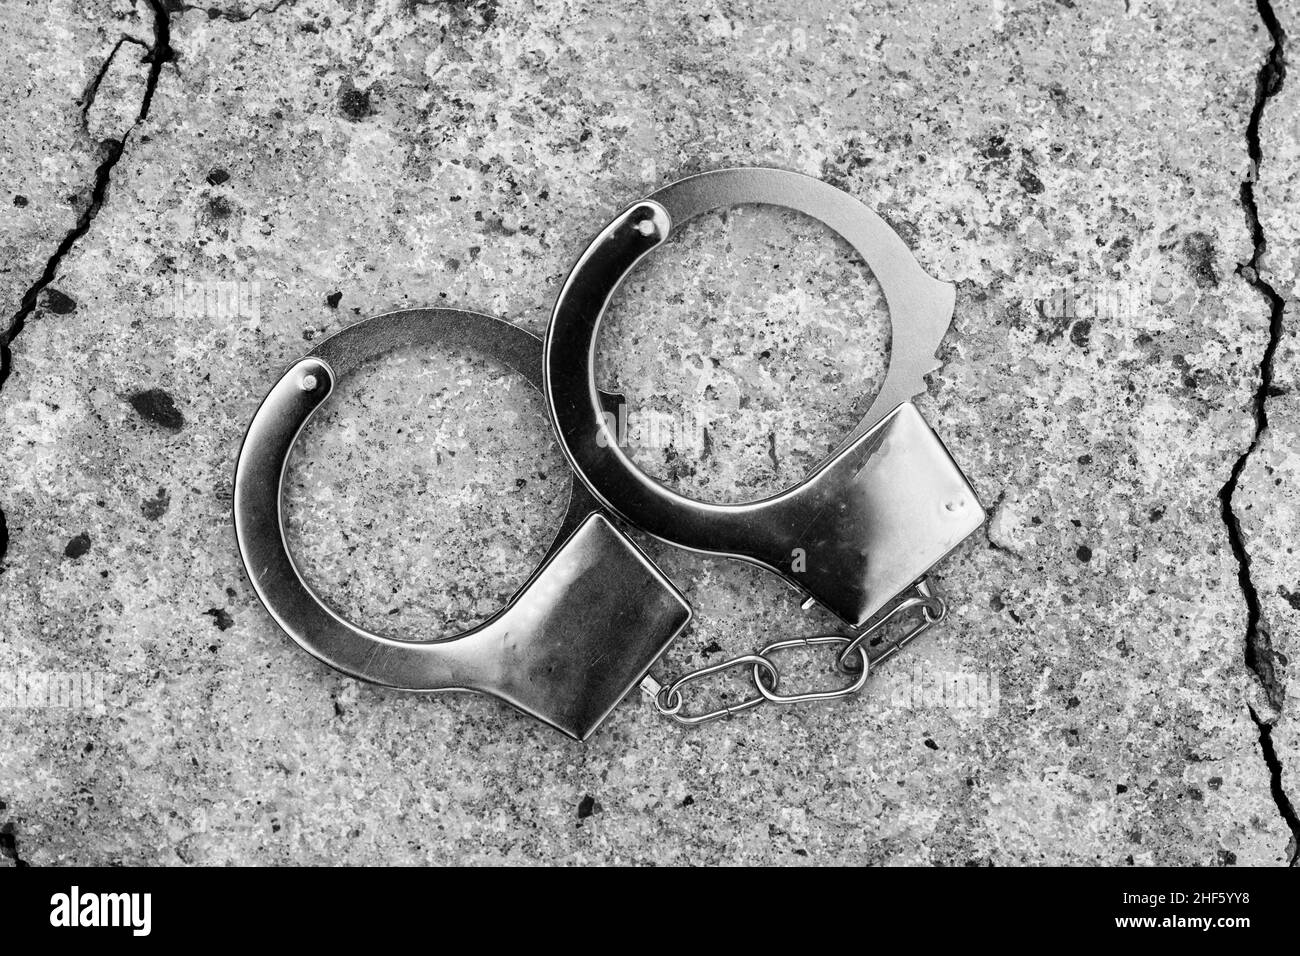 Handcuffs Black and White Stock Photos & Images - Alamy